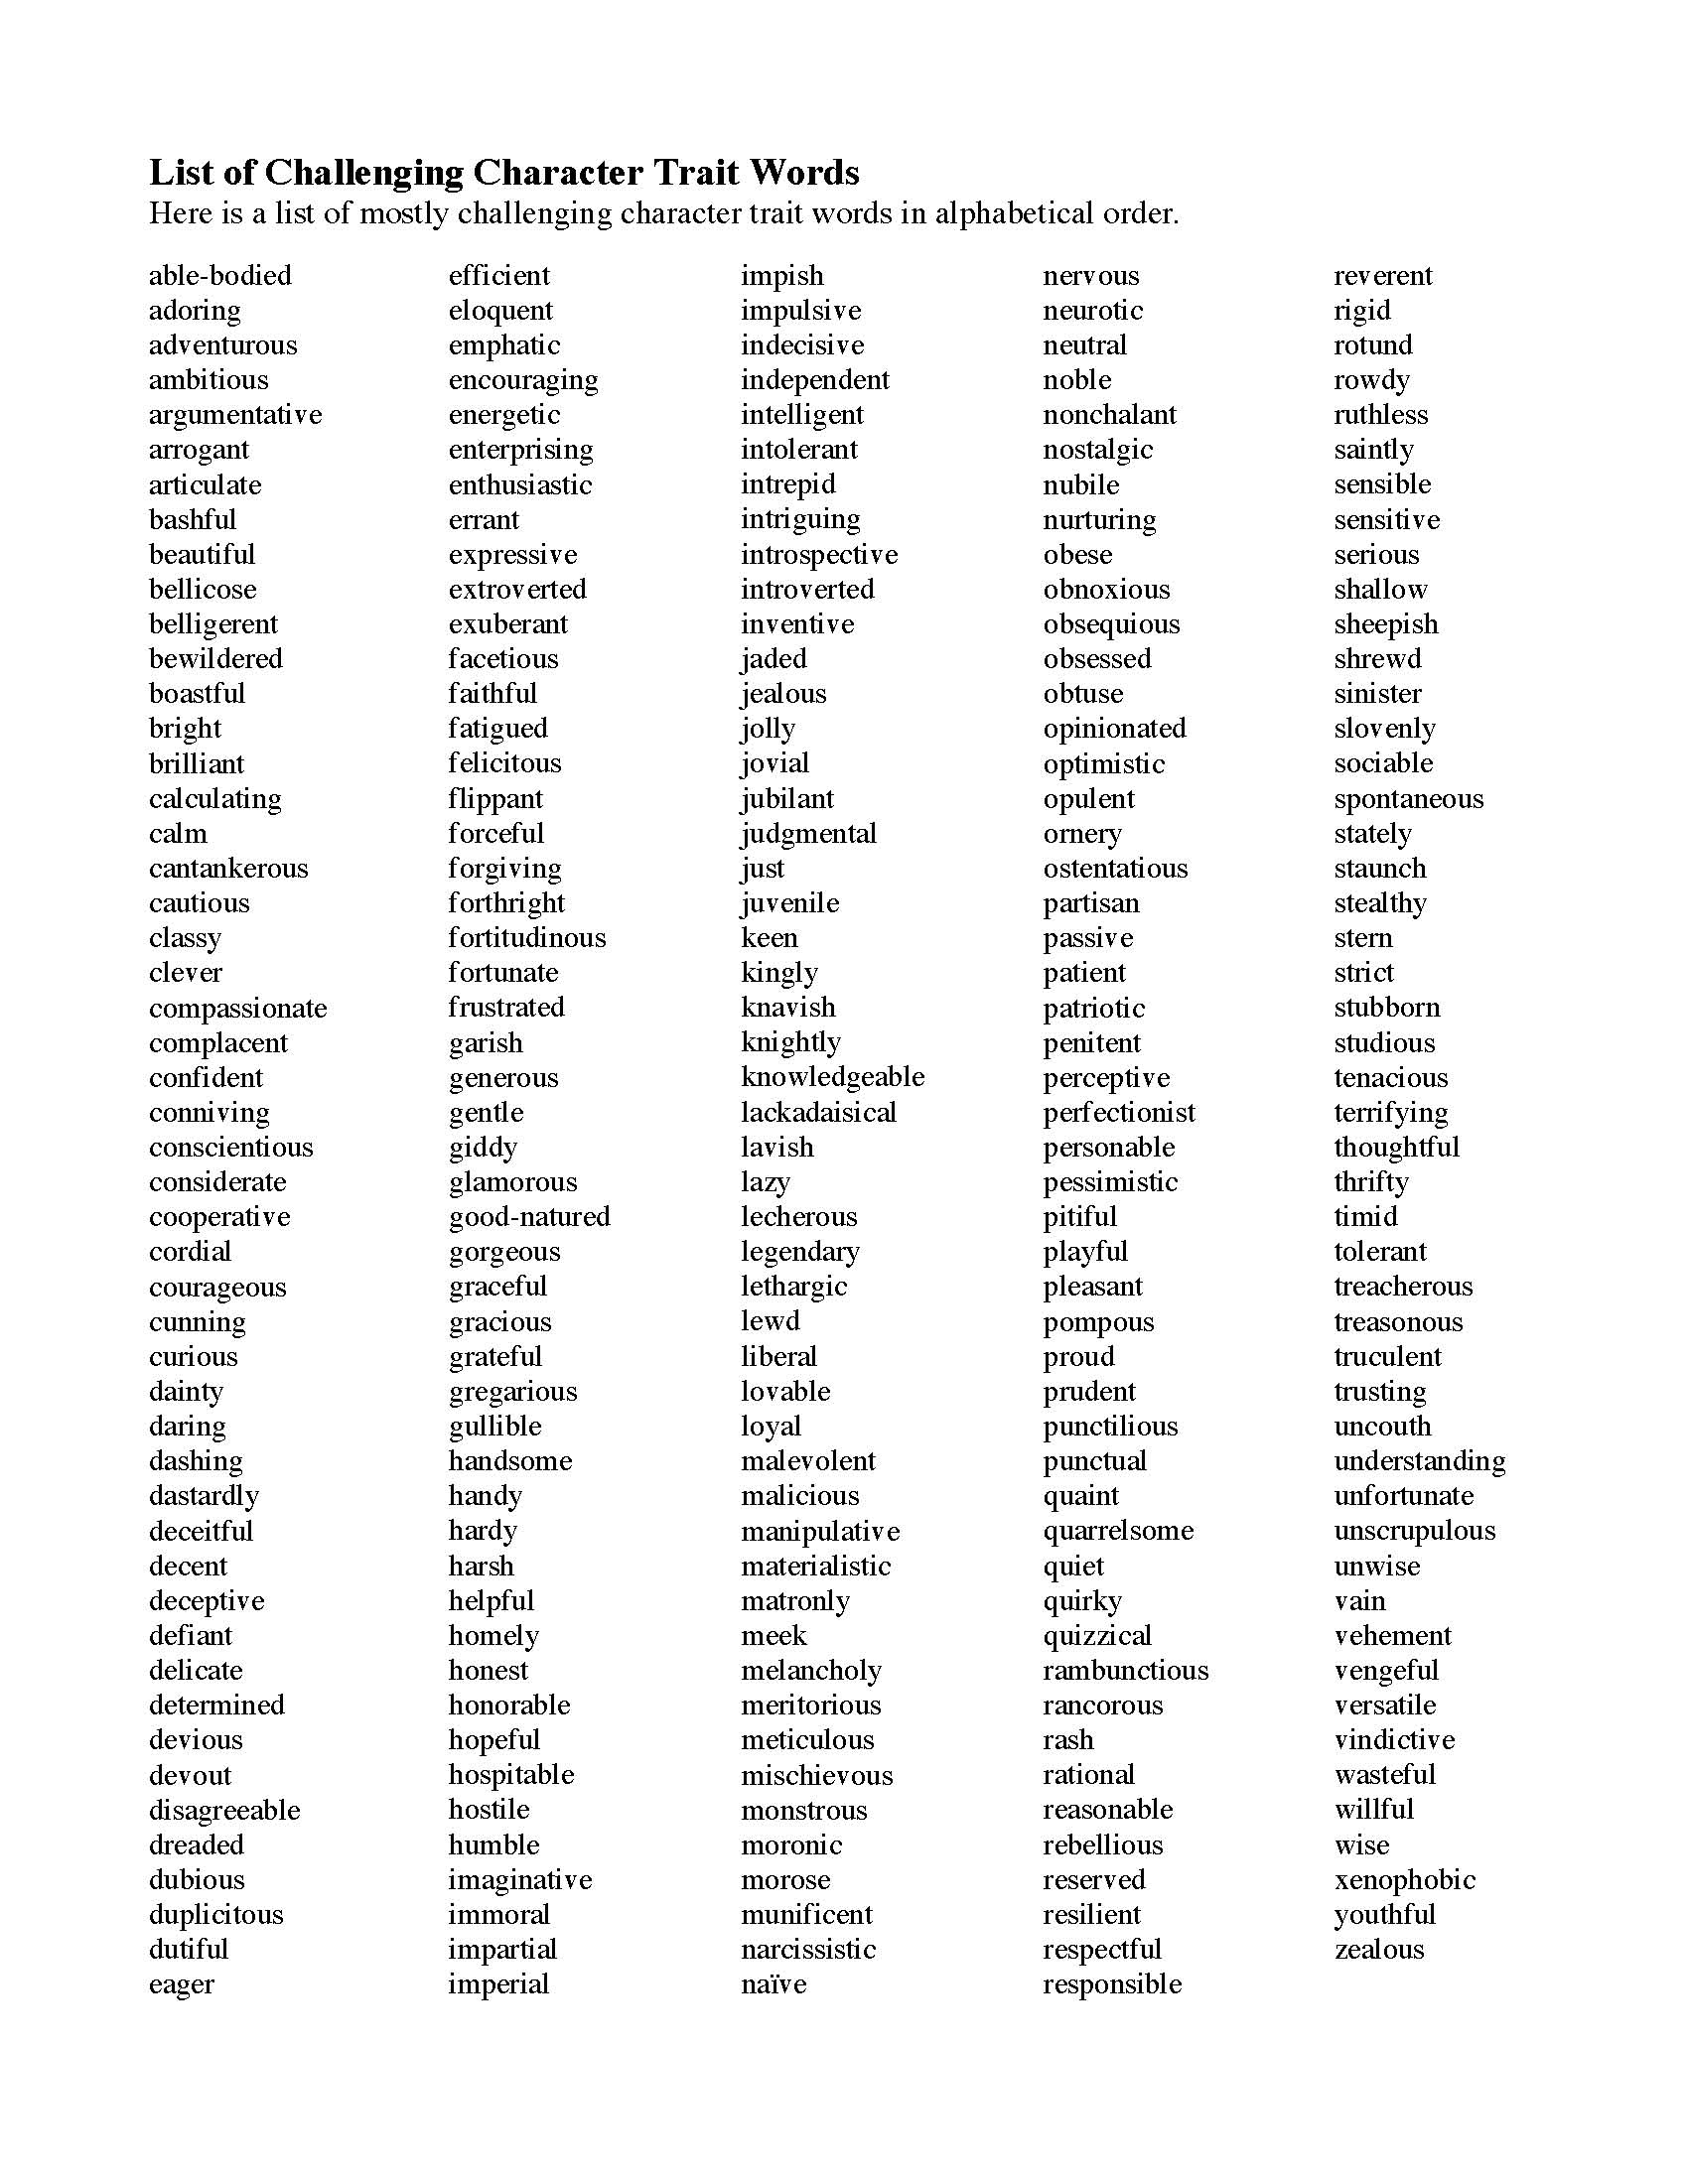 This is a preview image of Character Traits List. Click on it to enlarge it or view the source file.